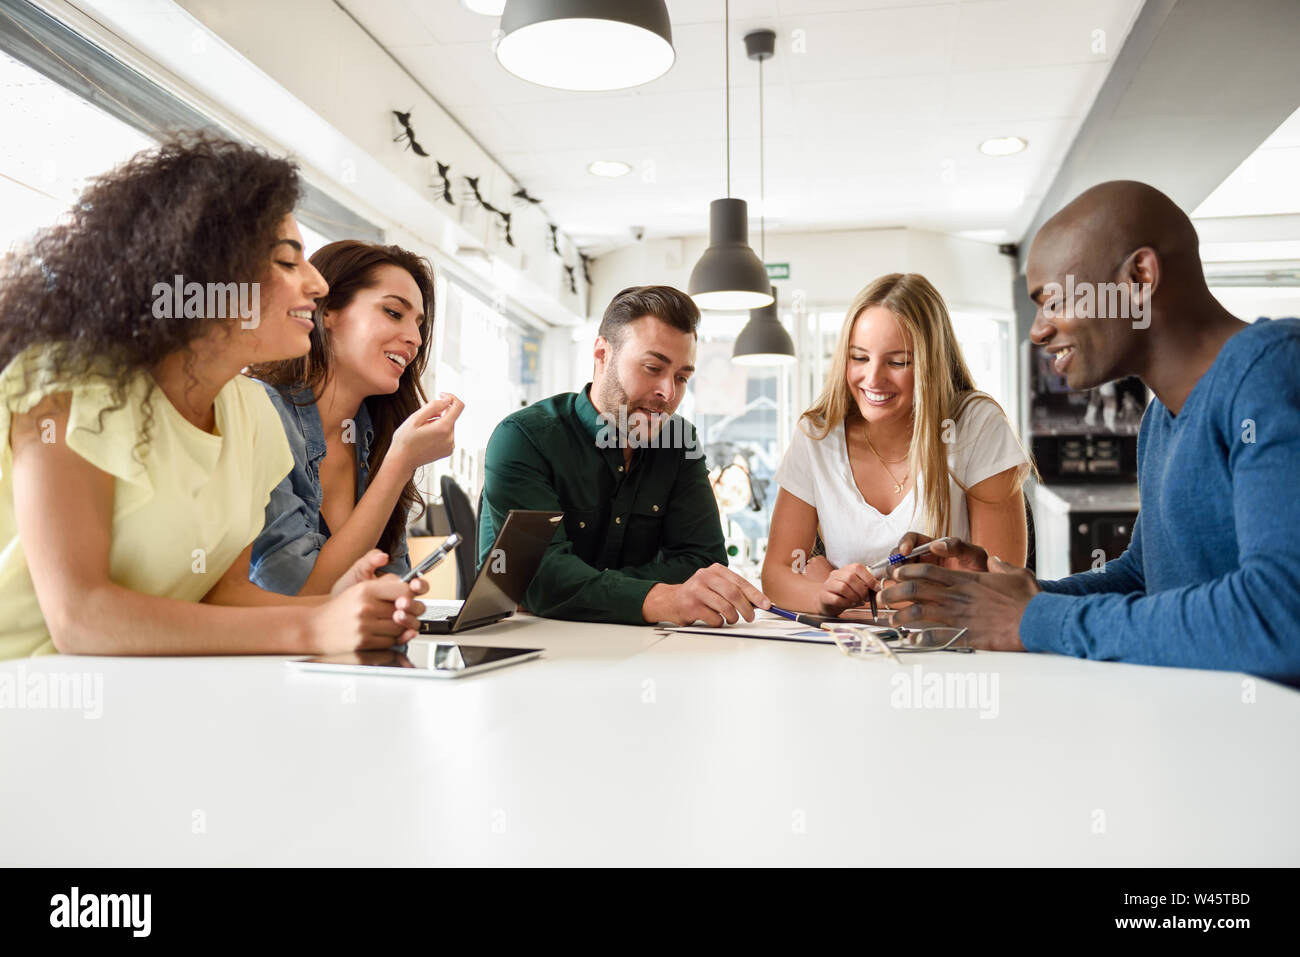 Multi-ethnic group of young people studying together on white desk Stock Photo